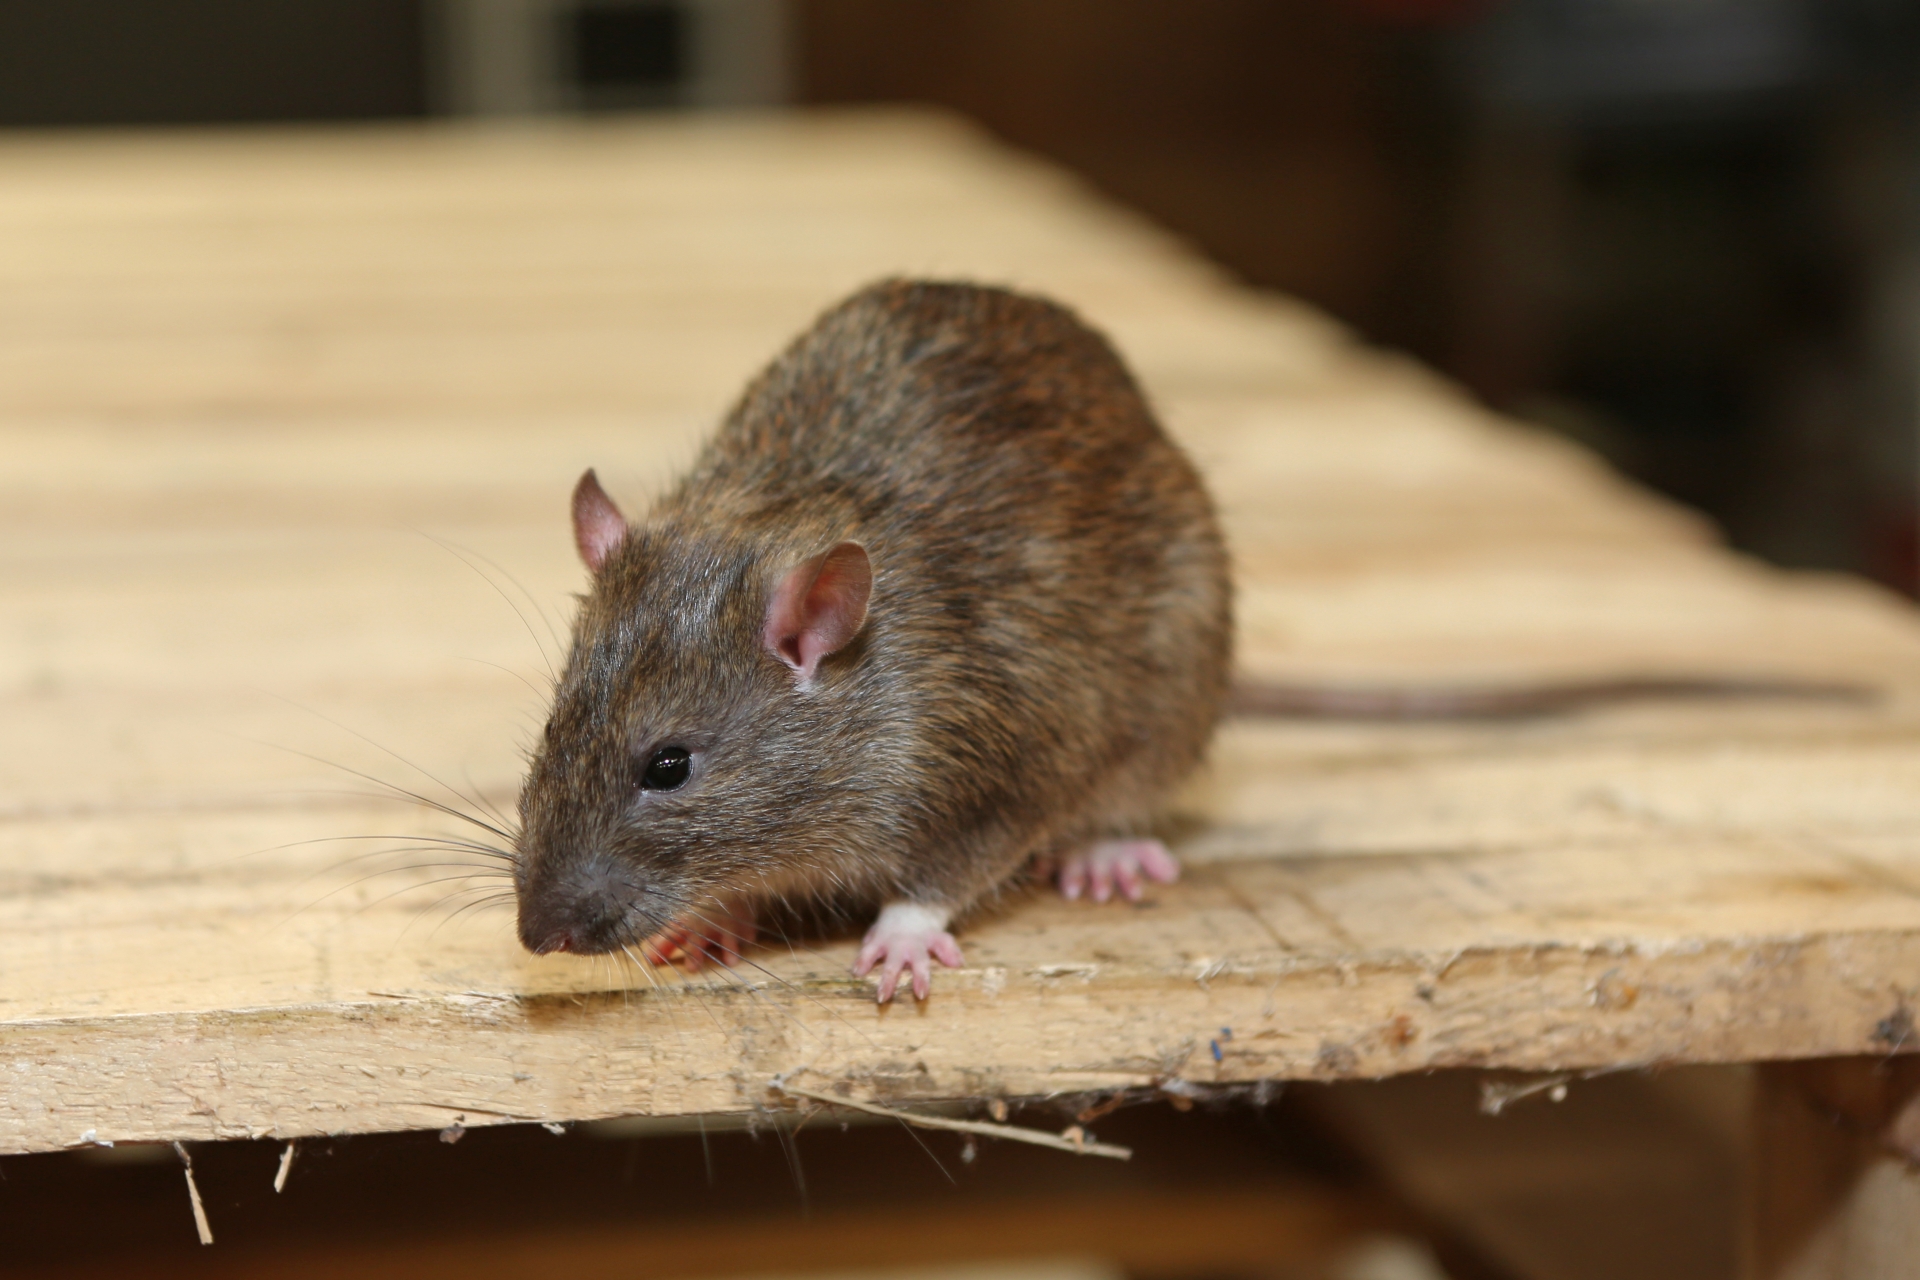 Rat Infestation, Pest Control in Hither Green, SE13. Call Now 020 8166 9746